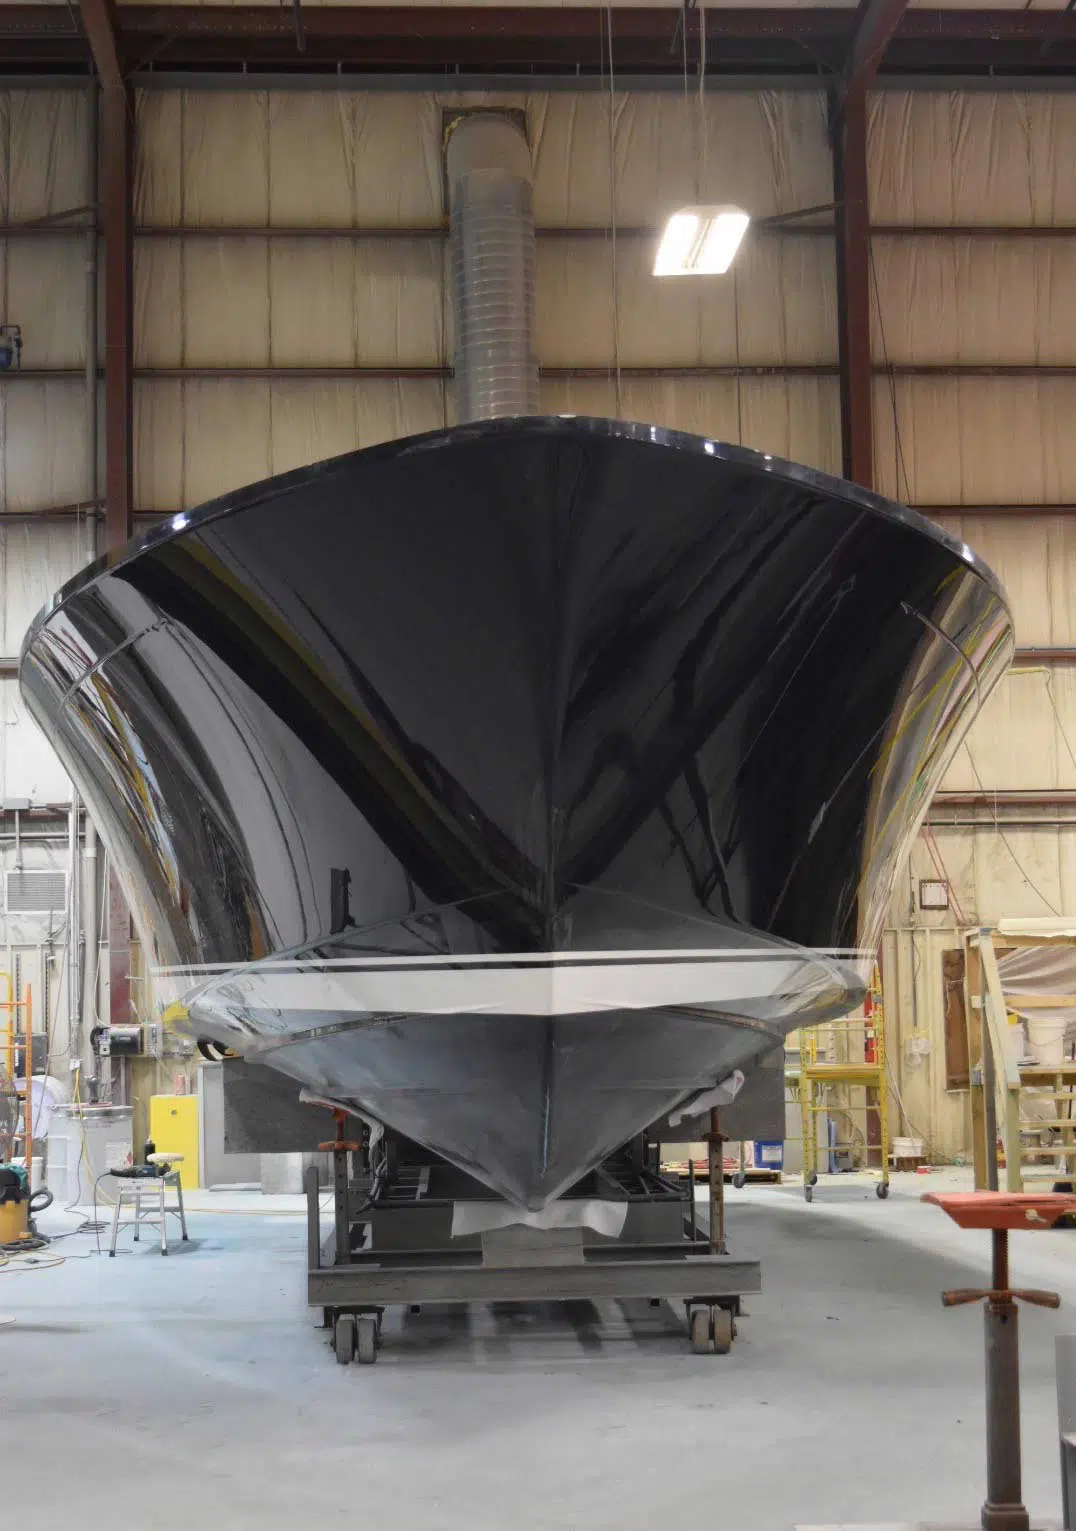 Sabre Yachts - Building & Manufacturing